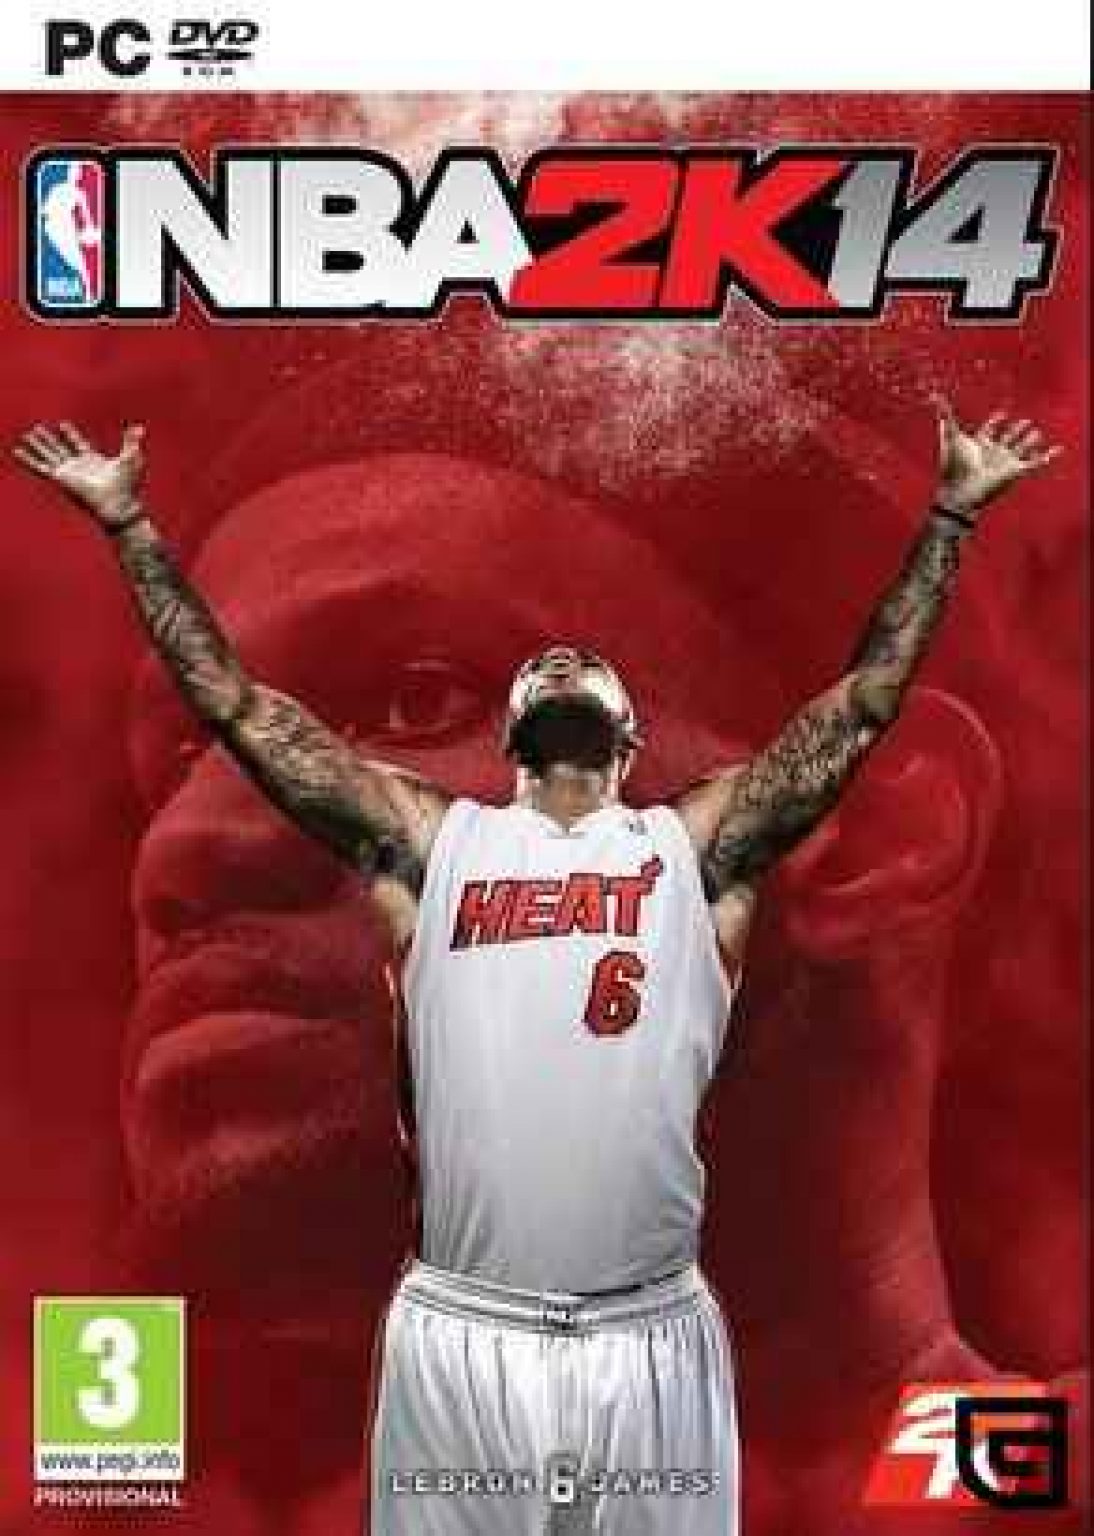 download nba 2k14 pc highly compressed